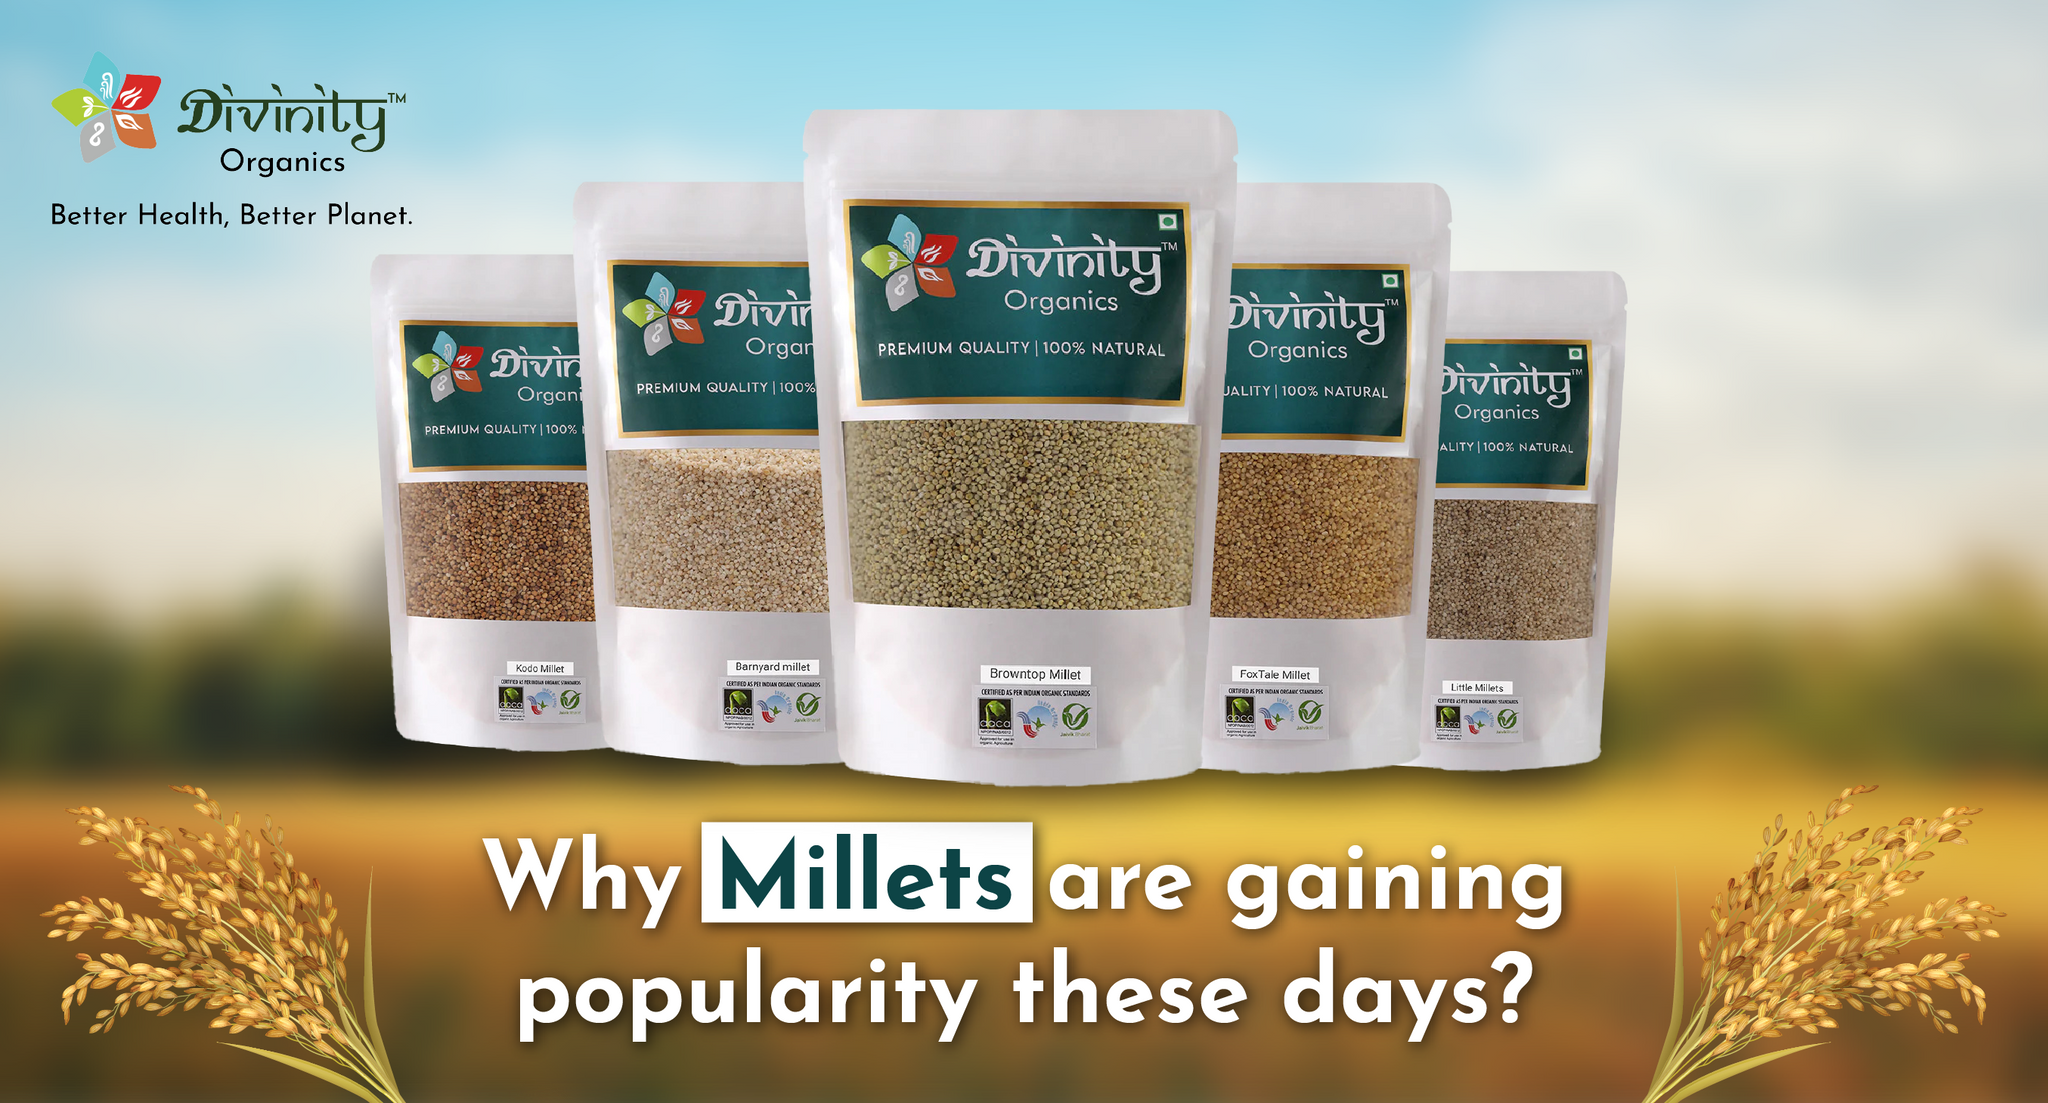 WHY MILLETS ARE GAINING POPULARITY THESE DAYS